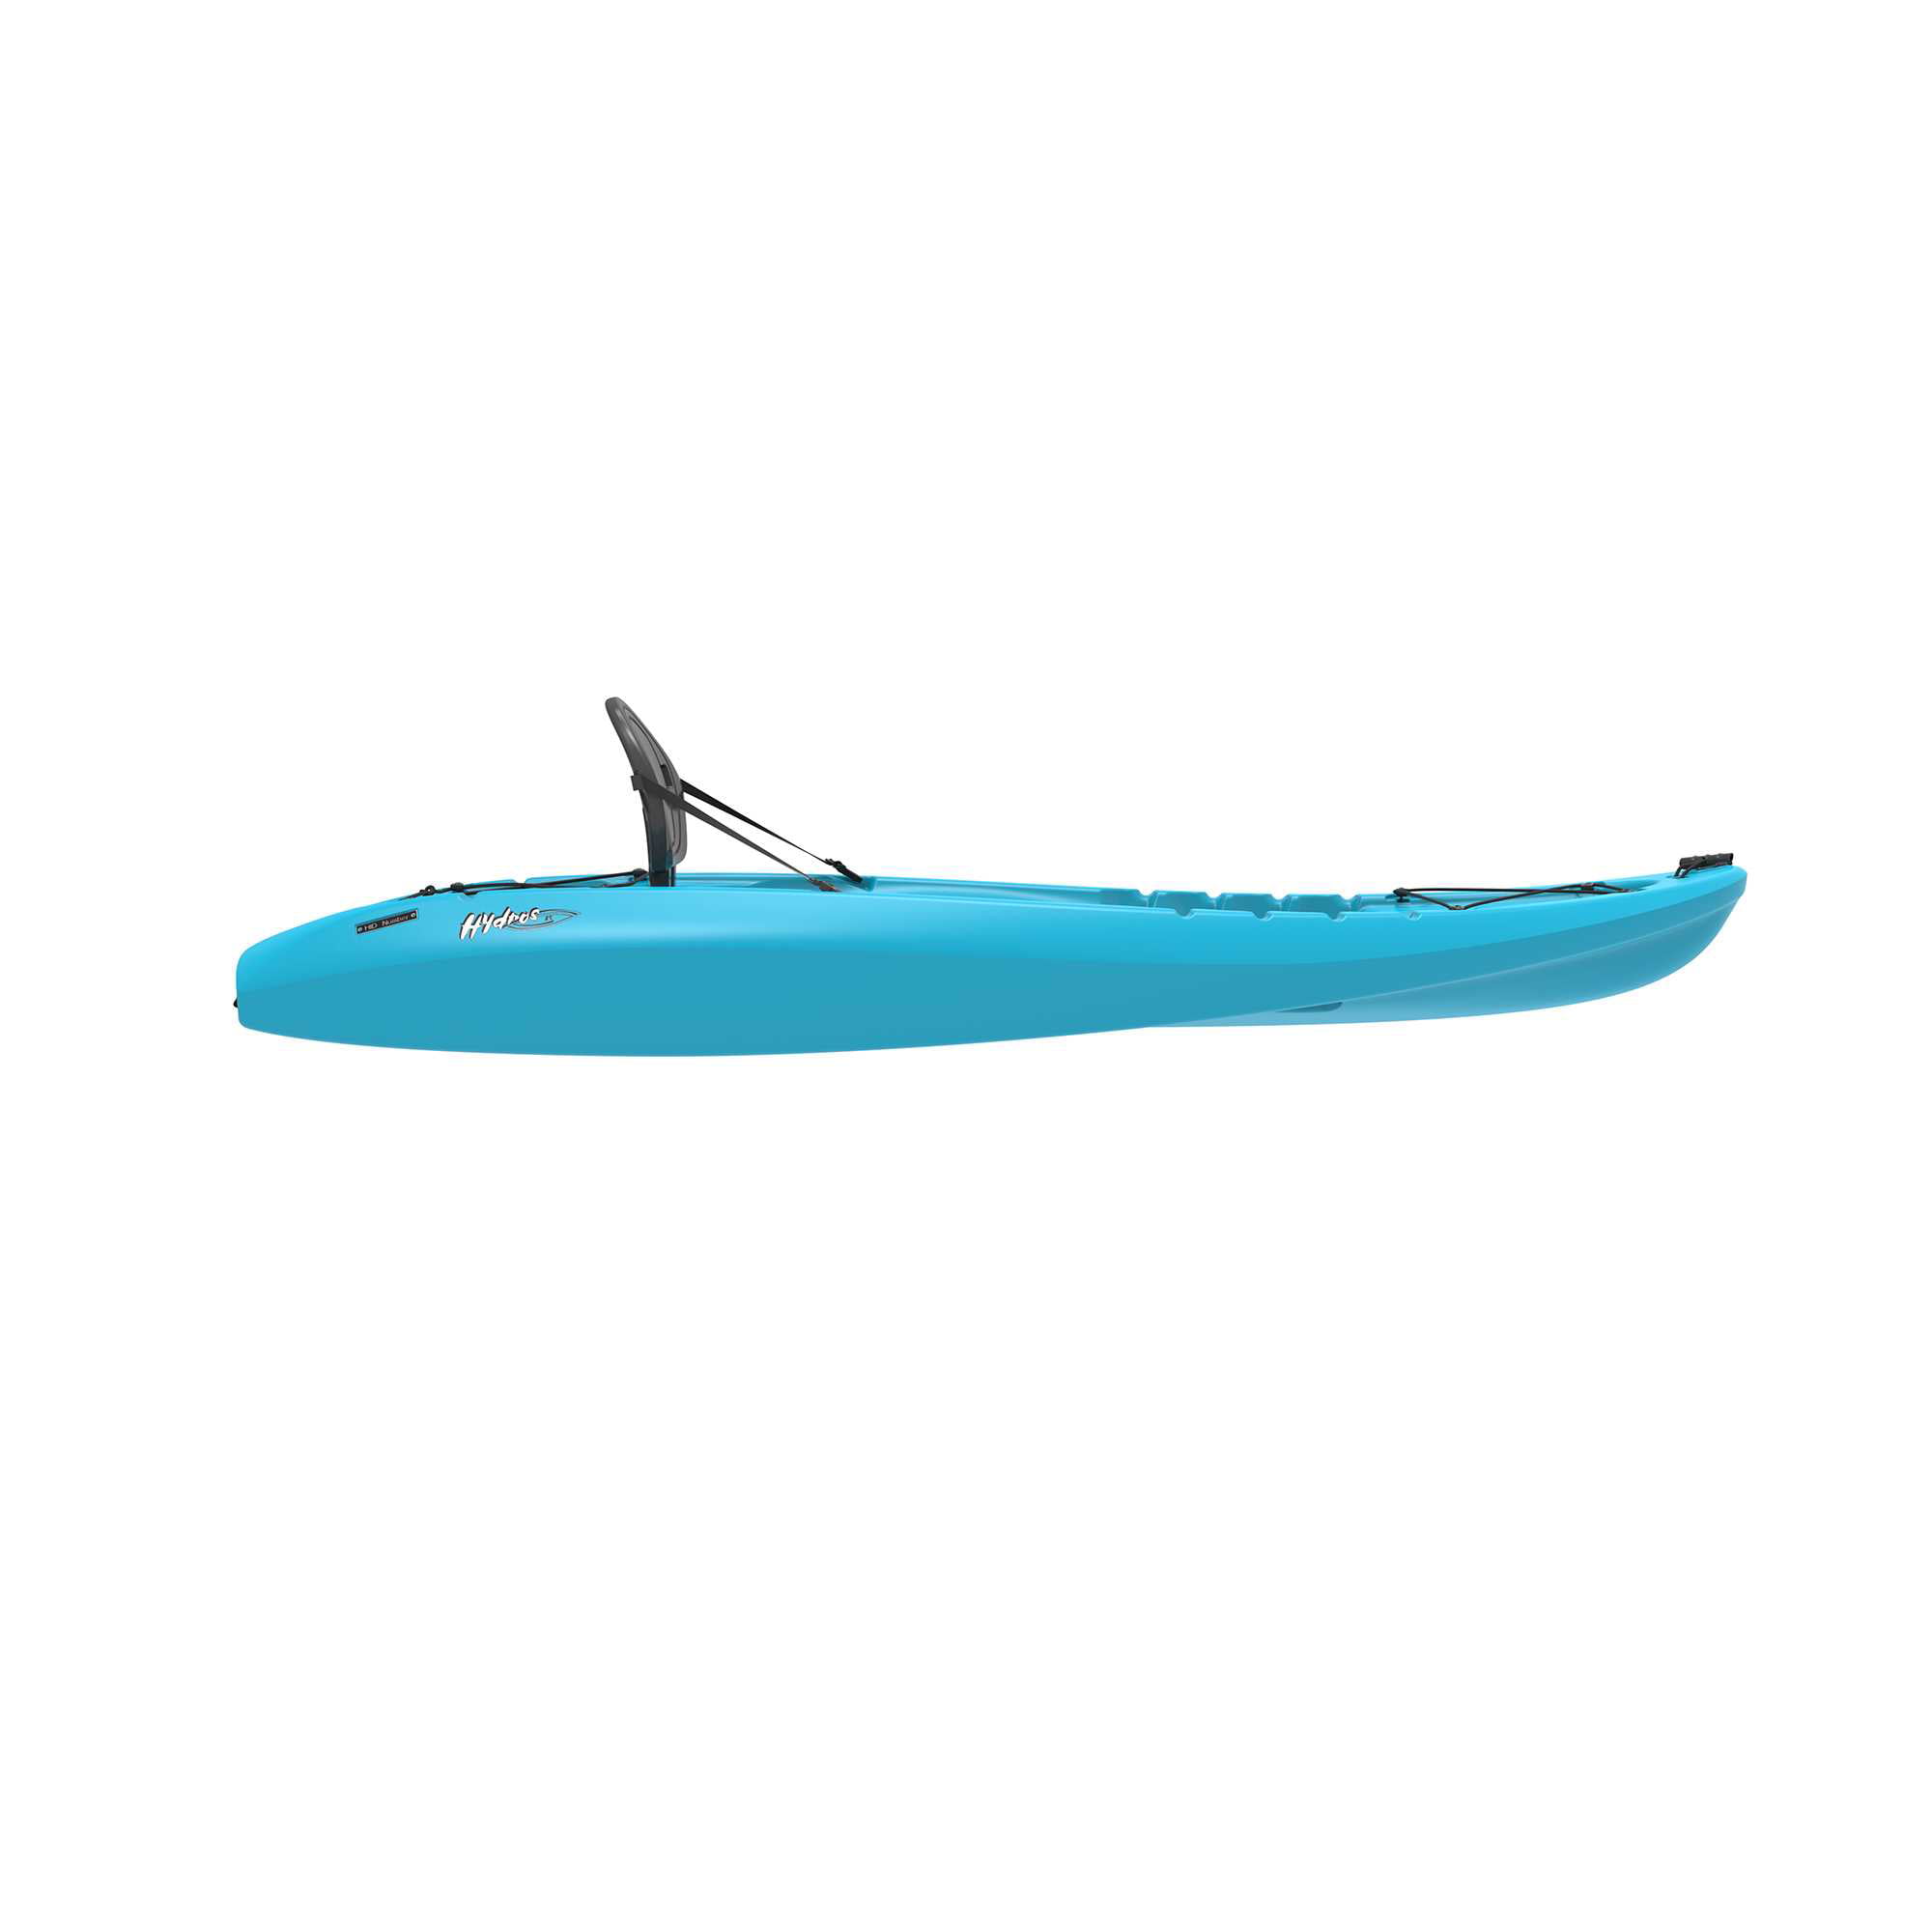 Lifetime Hydros 8 Ft. 5 In. Sit-on-top Kayak with Paddle, 90595